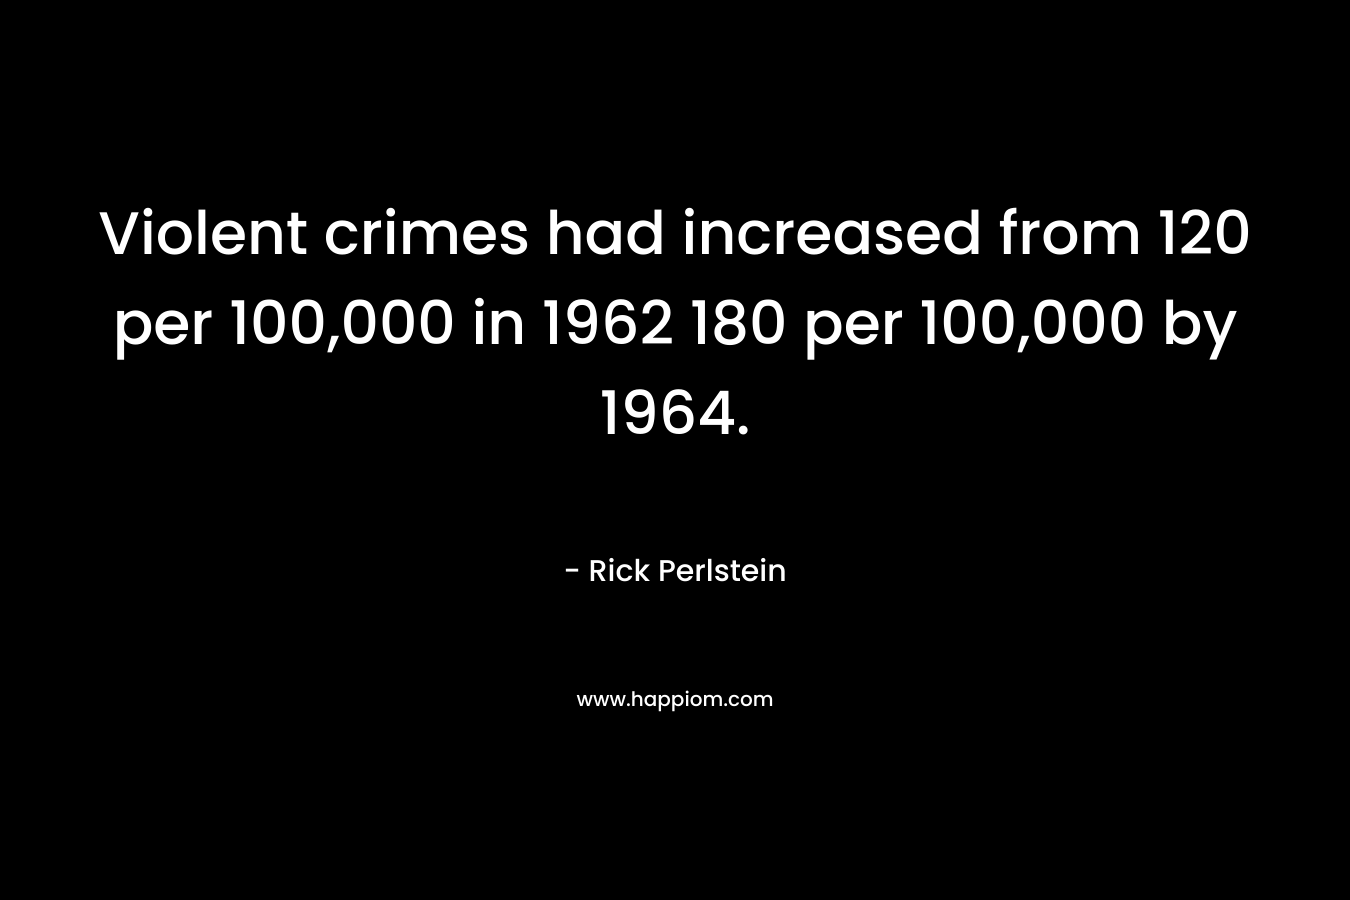 Violent crimes had increased from 120 per 100,000 in 1962 180 per 100,000 by 1964.